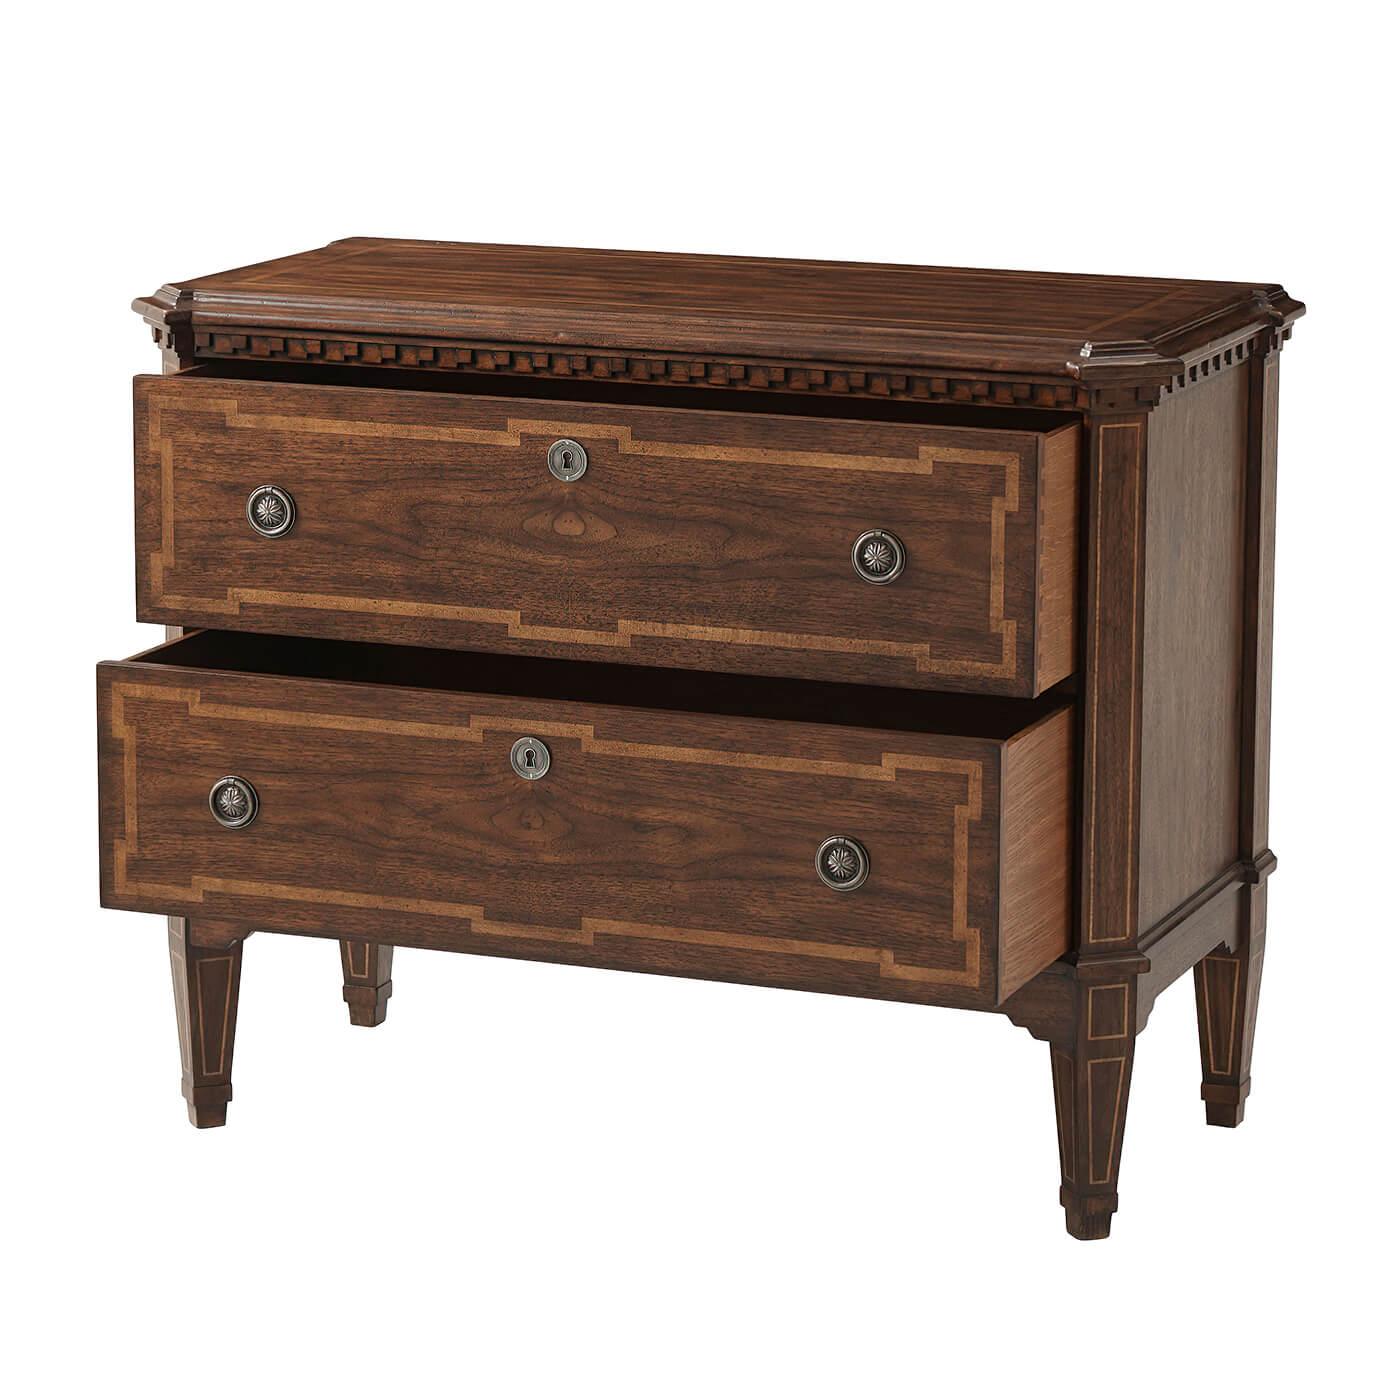 A European Louis XVI style commode with a molded edge top with canted corners, carved dental molding frieze above two long drawers with panel inlays, antiqued pewter handles and square tapered and inlaid legs.

Dimensions: 40